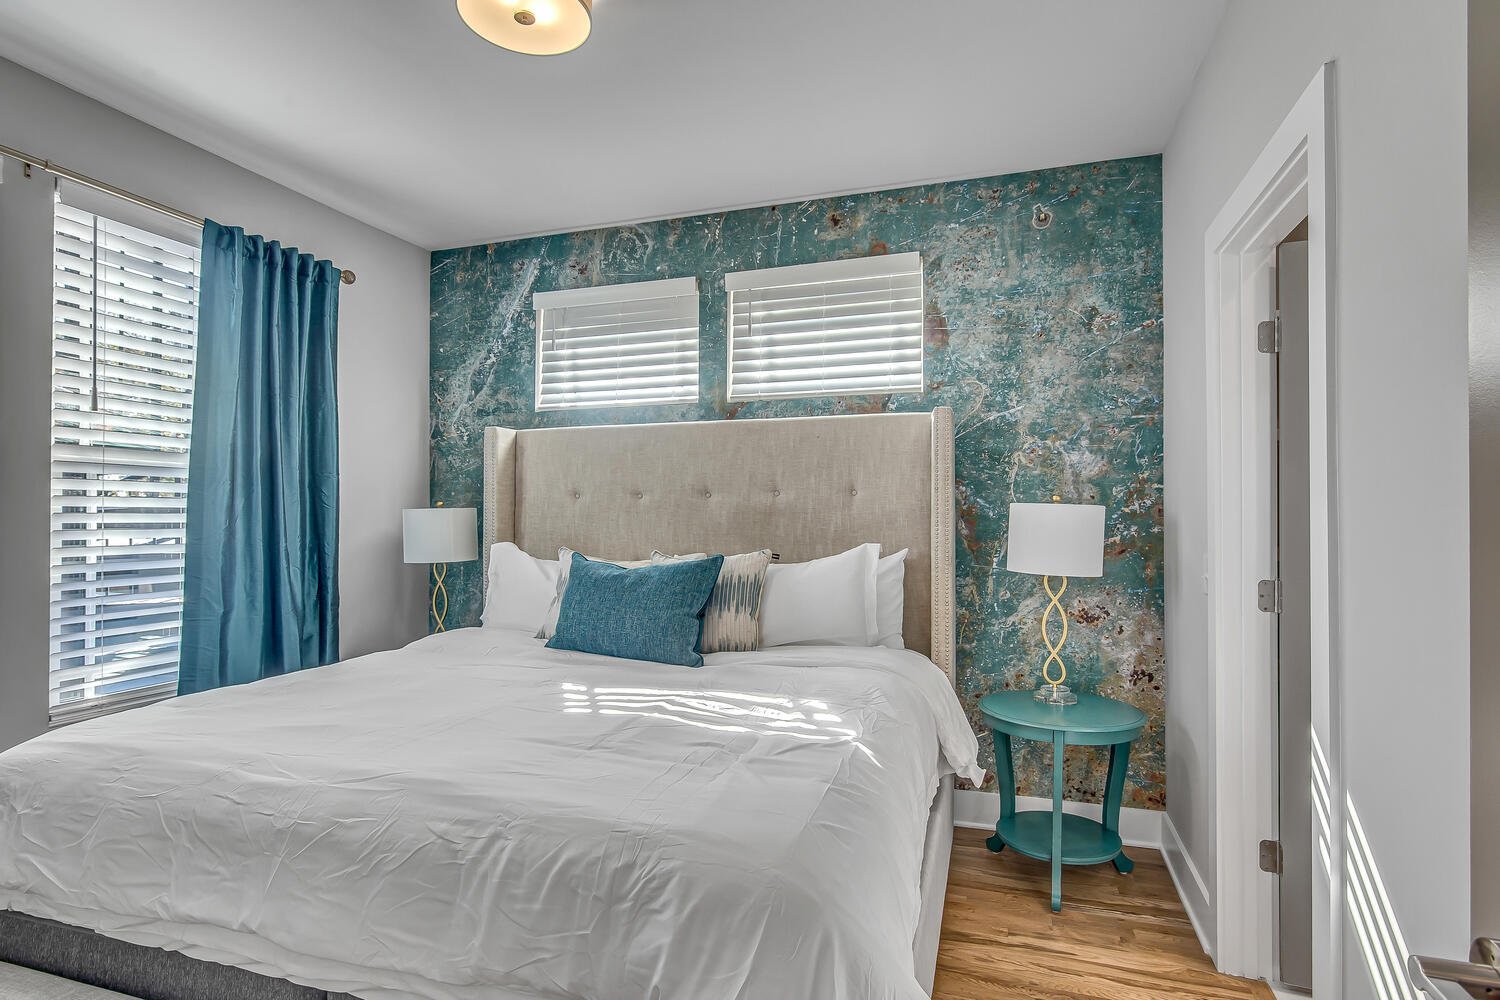 Unit 1: PRIMARY BEDROOM (3rd floor) King bed, large flat screen TV, walk in closet, en-suite master bathroom with large vanity and shower/tub combo.